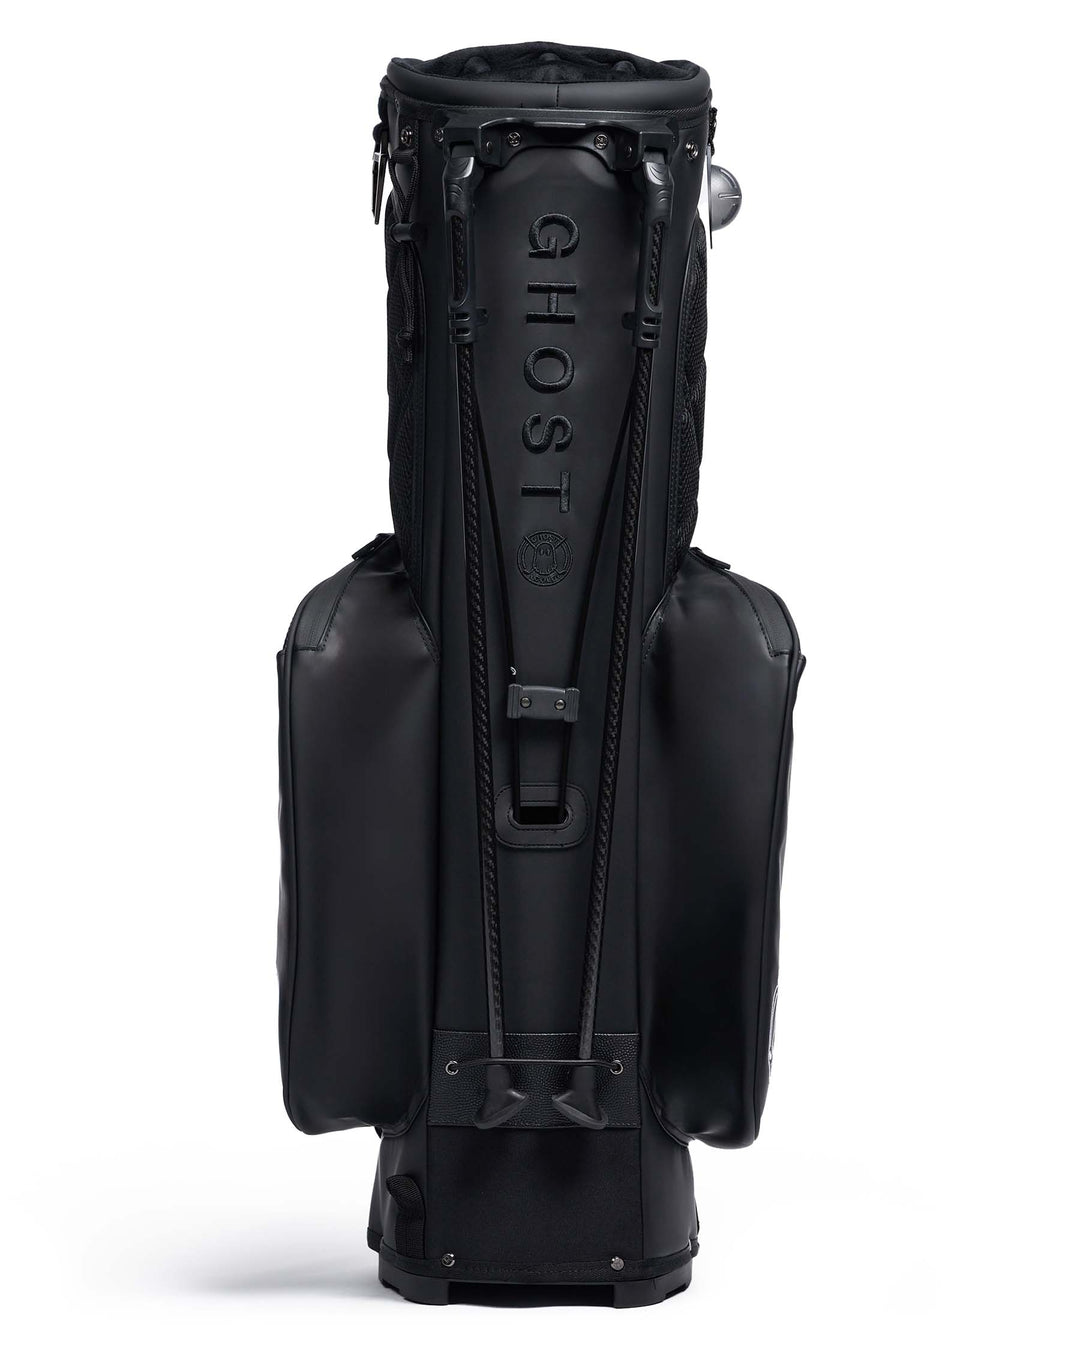 RONIN Black and Carbon Fiber Accents Golf Bag with Red Tags